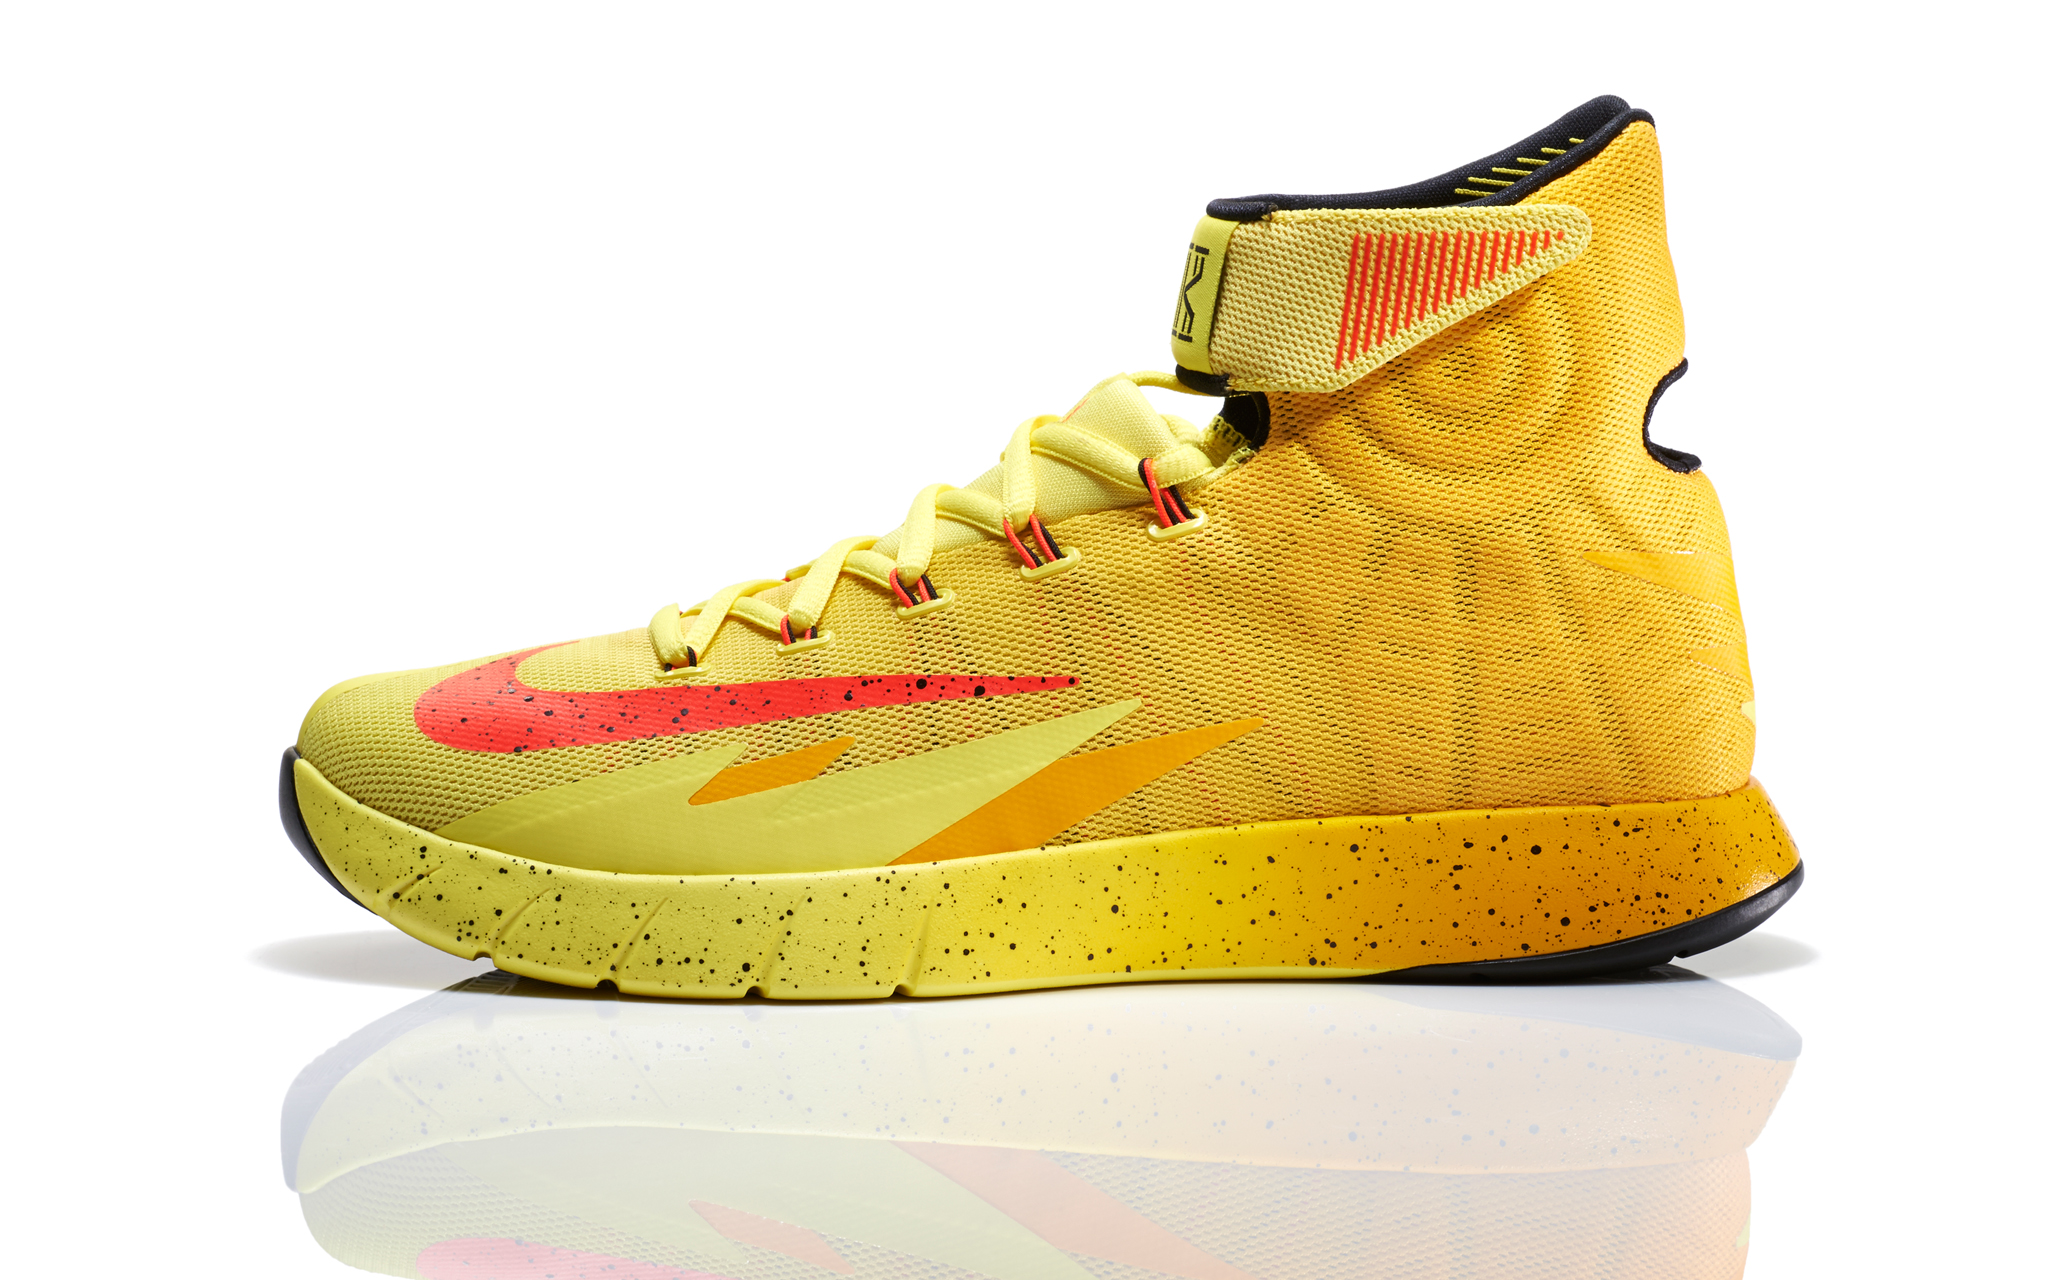 kids kyrie irving shoes